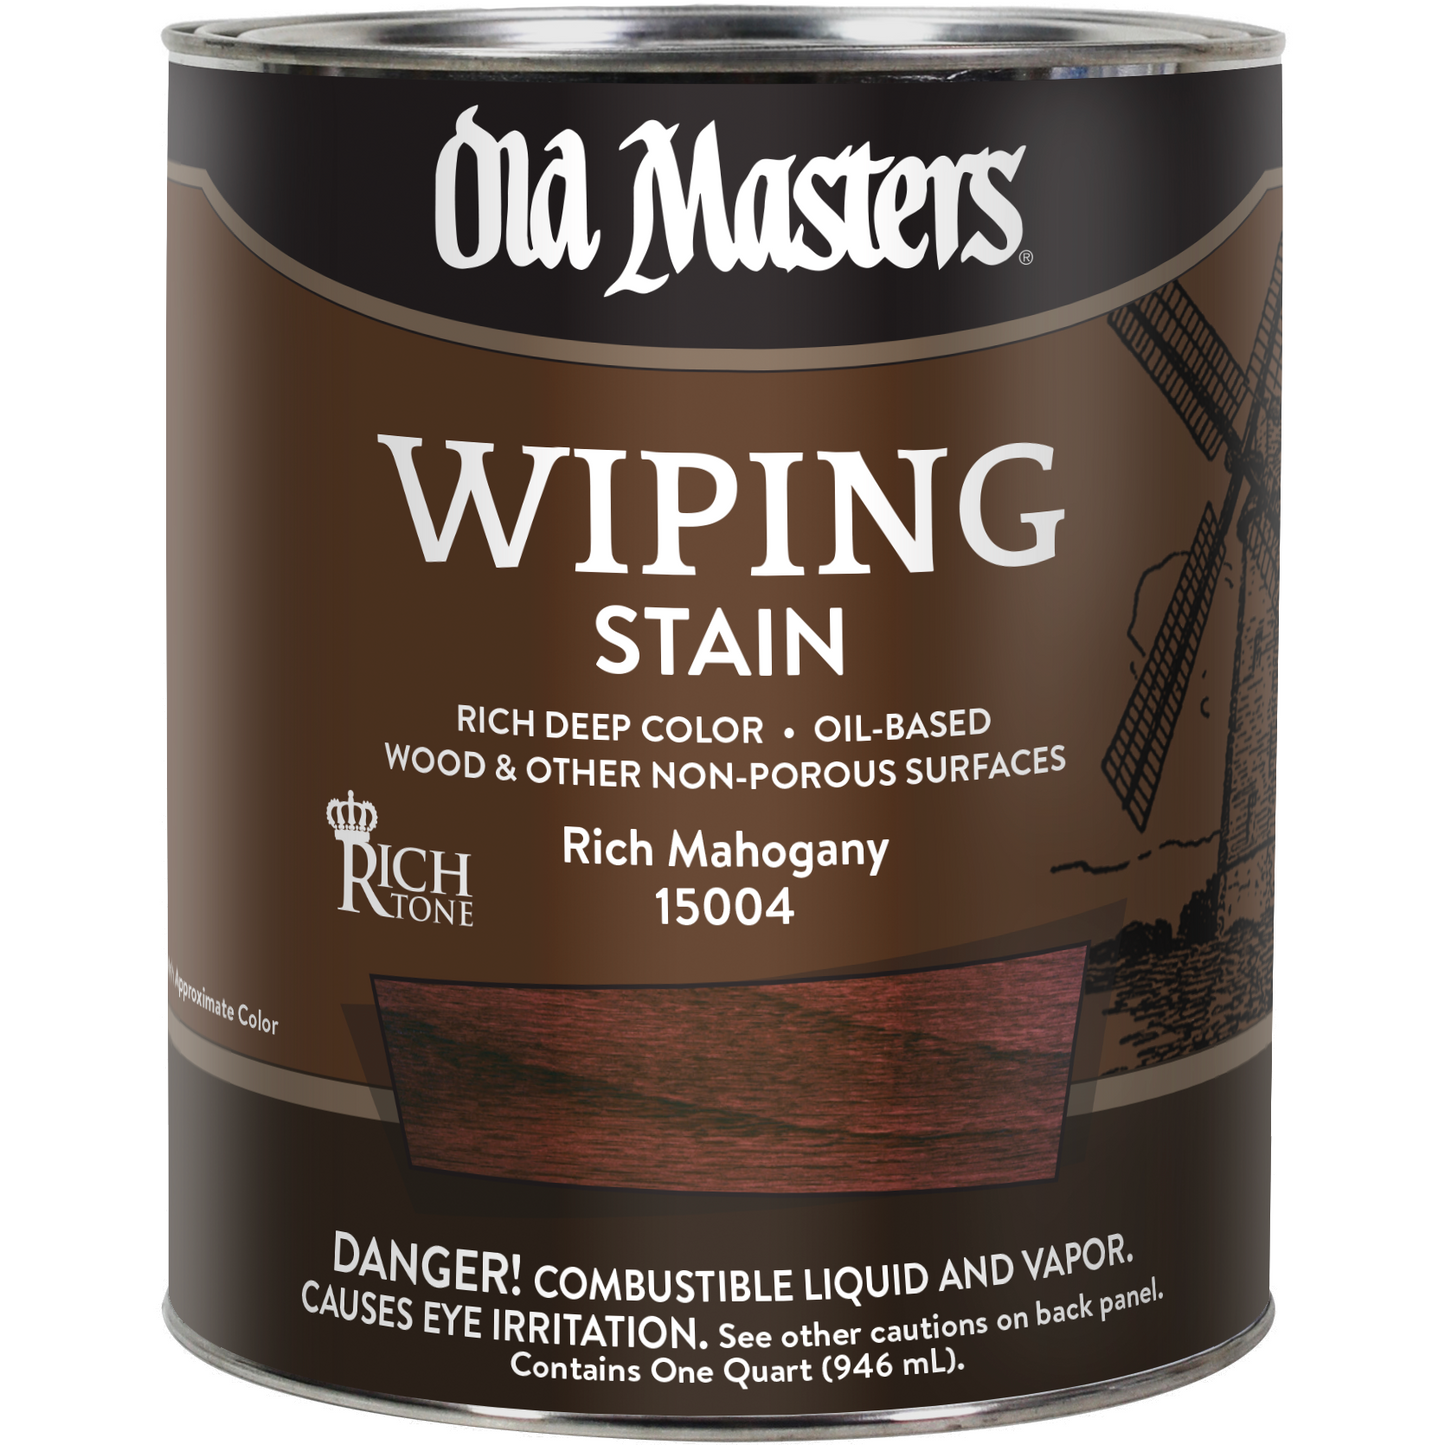 Old Masters Wiping Stain - Rich Mahogany